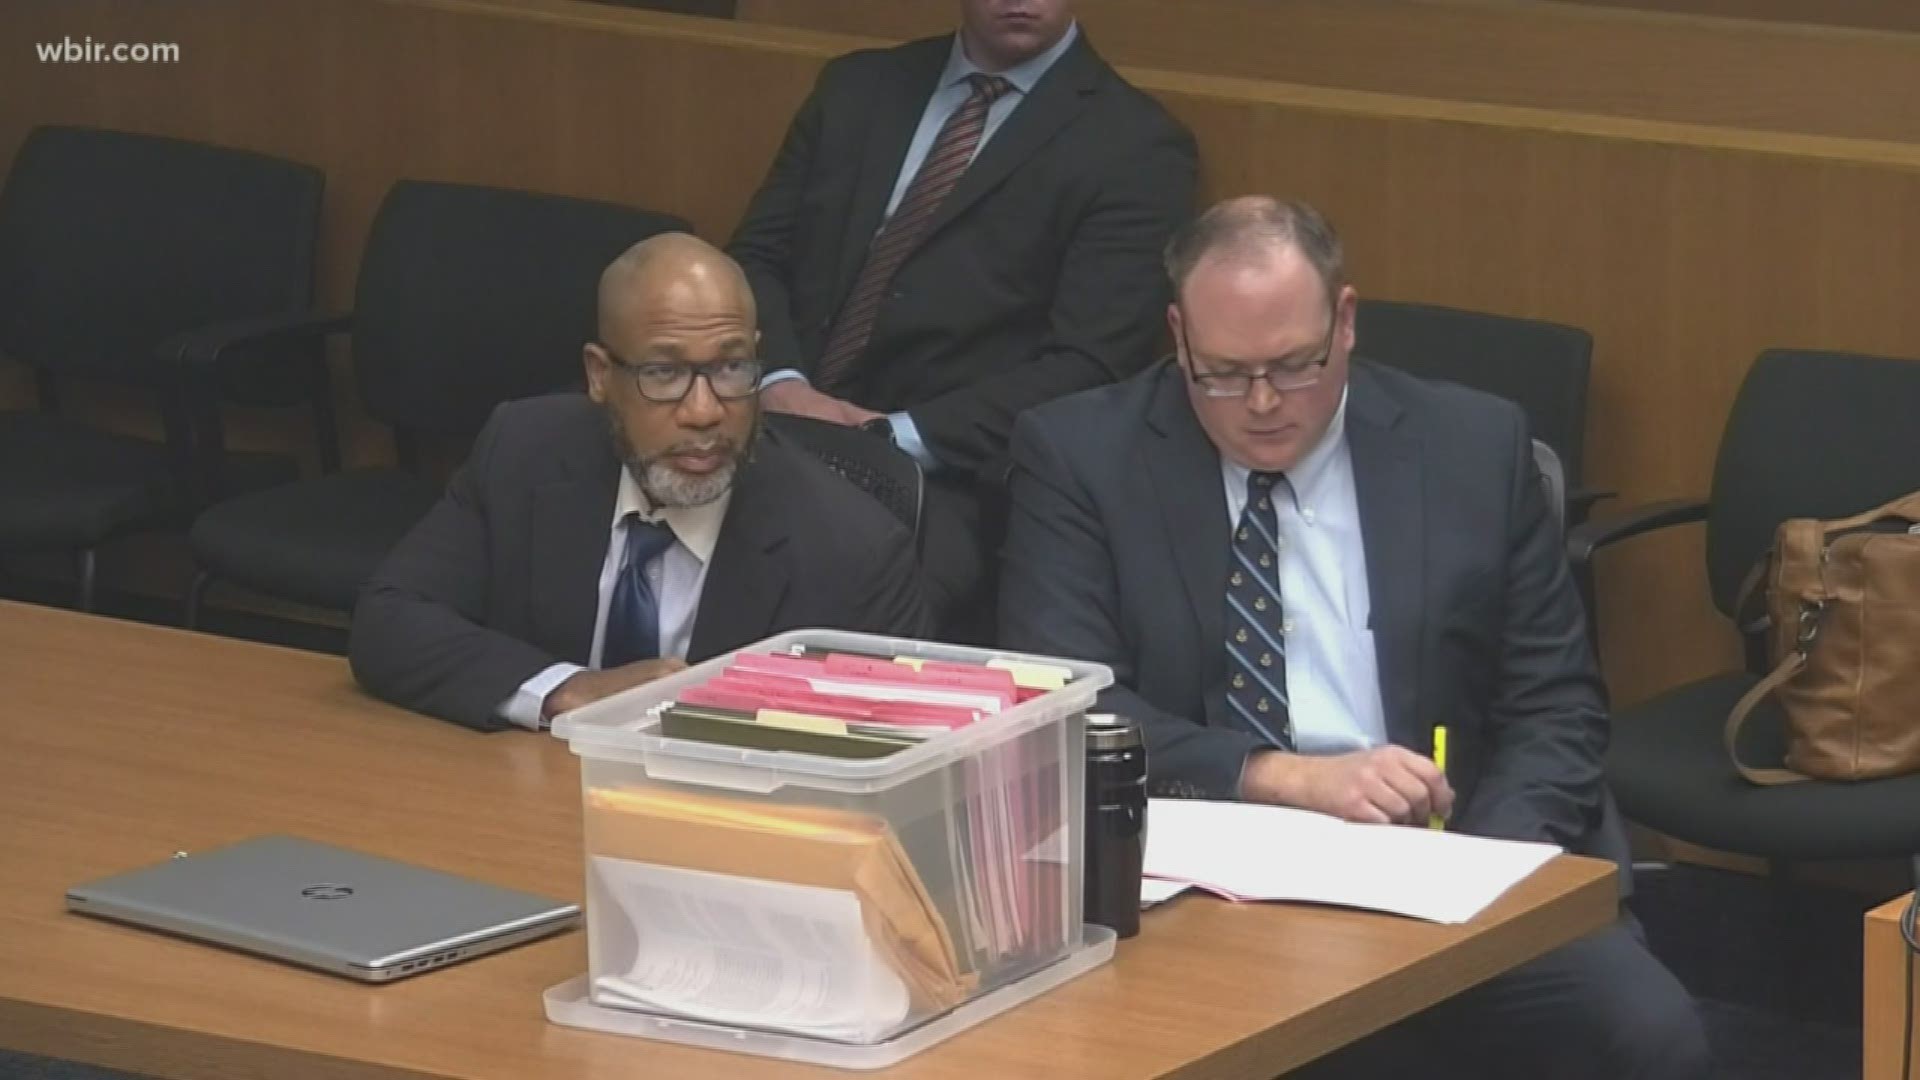 Another busy morning in the Eric Boyd Trial. 10 witnesses were called to stand during Friday morning's testimony. Boyd is charged with the murder, rape and kidnapping of Channon Christian and Chris Newsom in 2007.